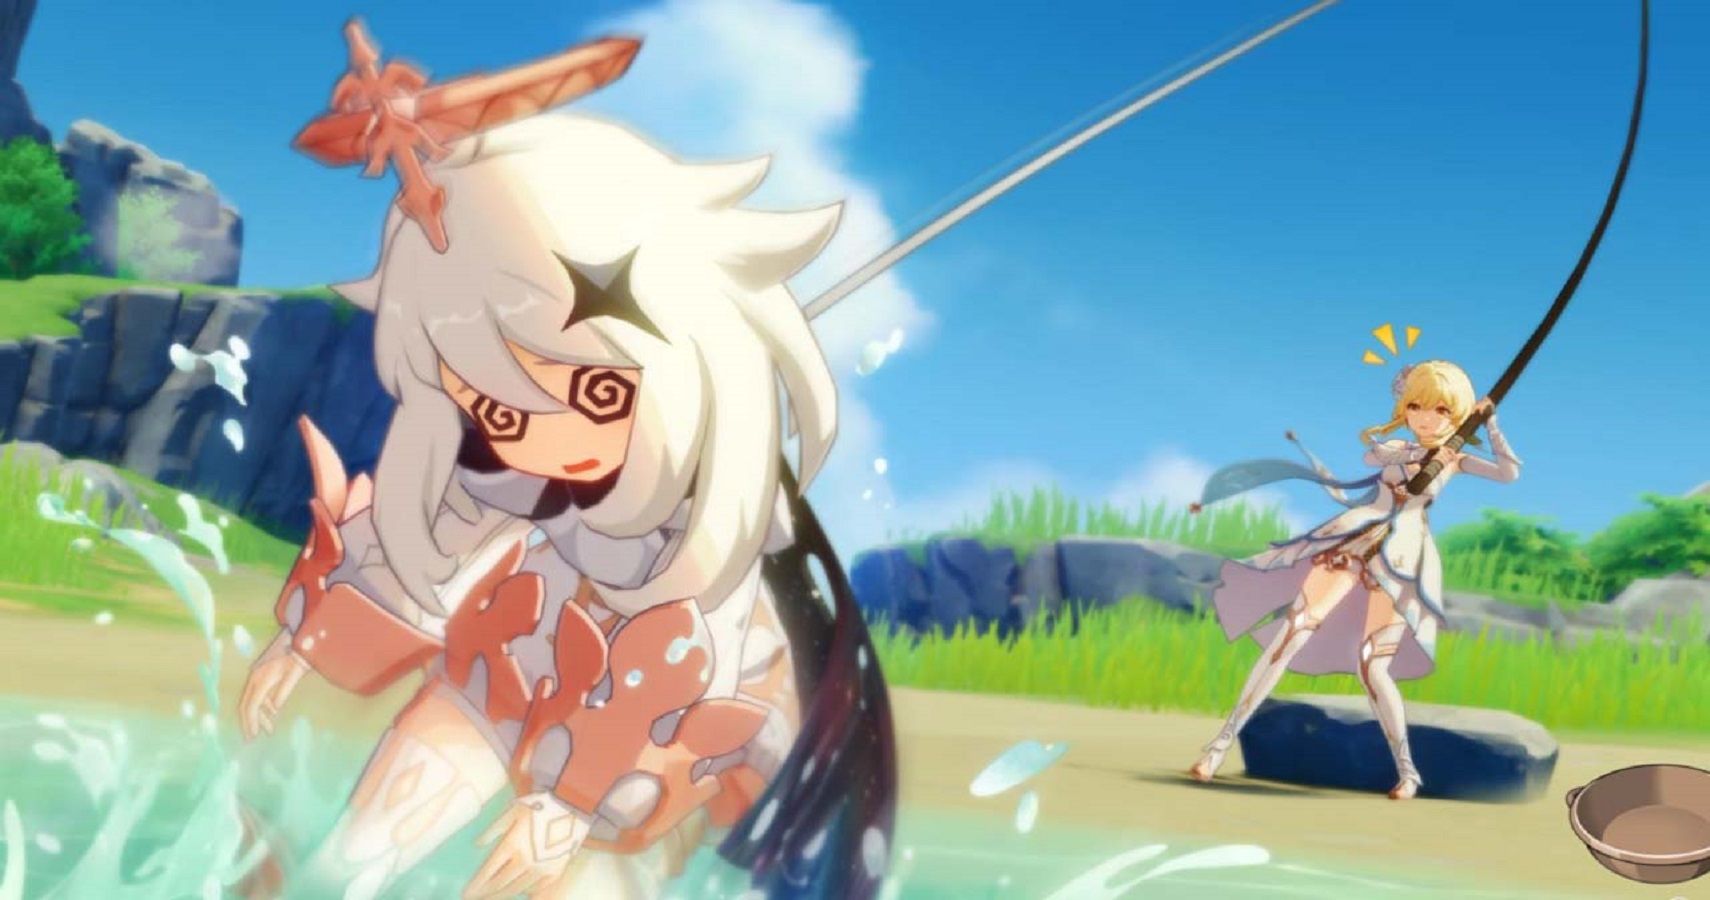 No Xiao Isnt Going To Eat Paimon In Genshin Impact Patch 11 — Its Just A Stupid Meme